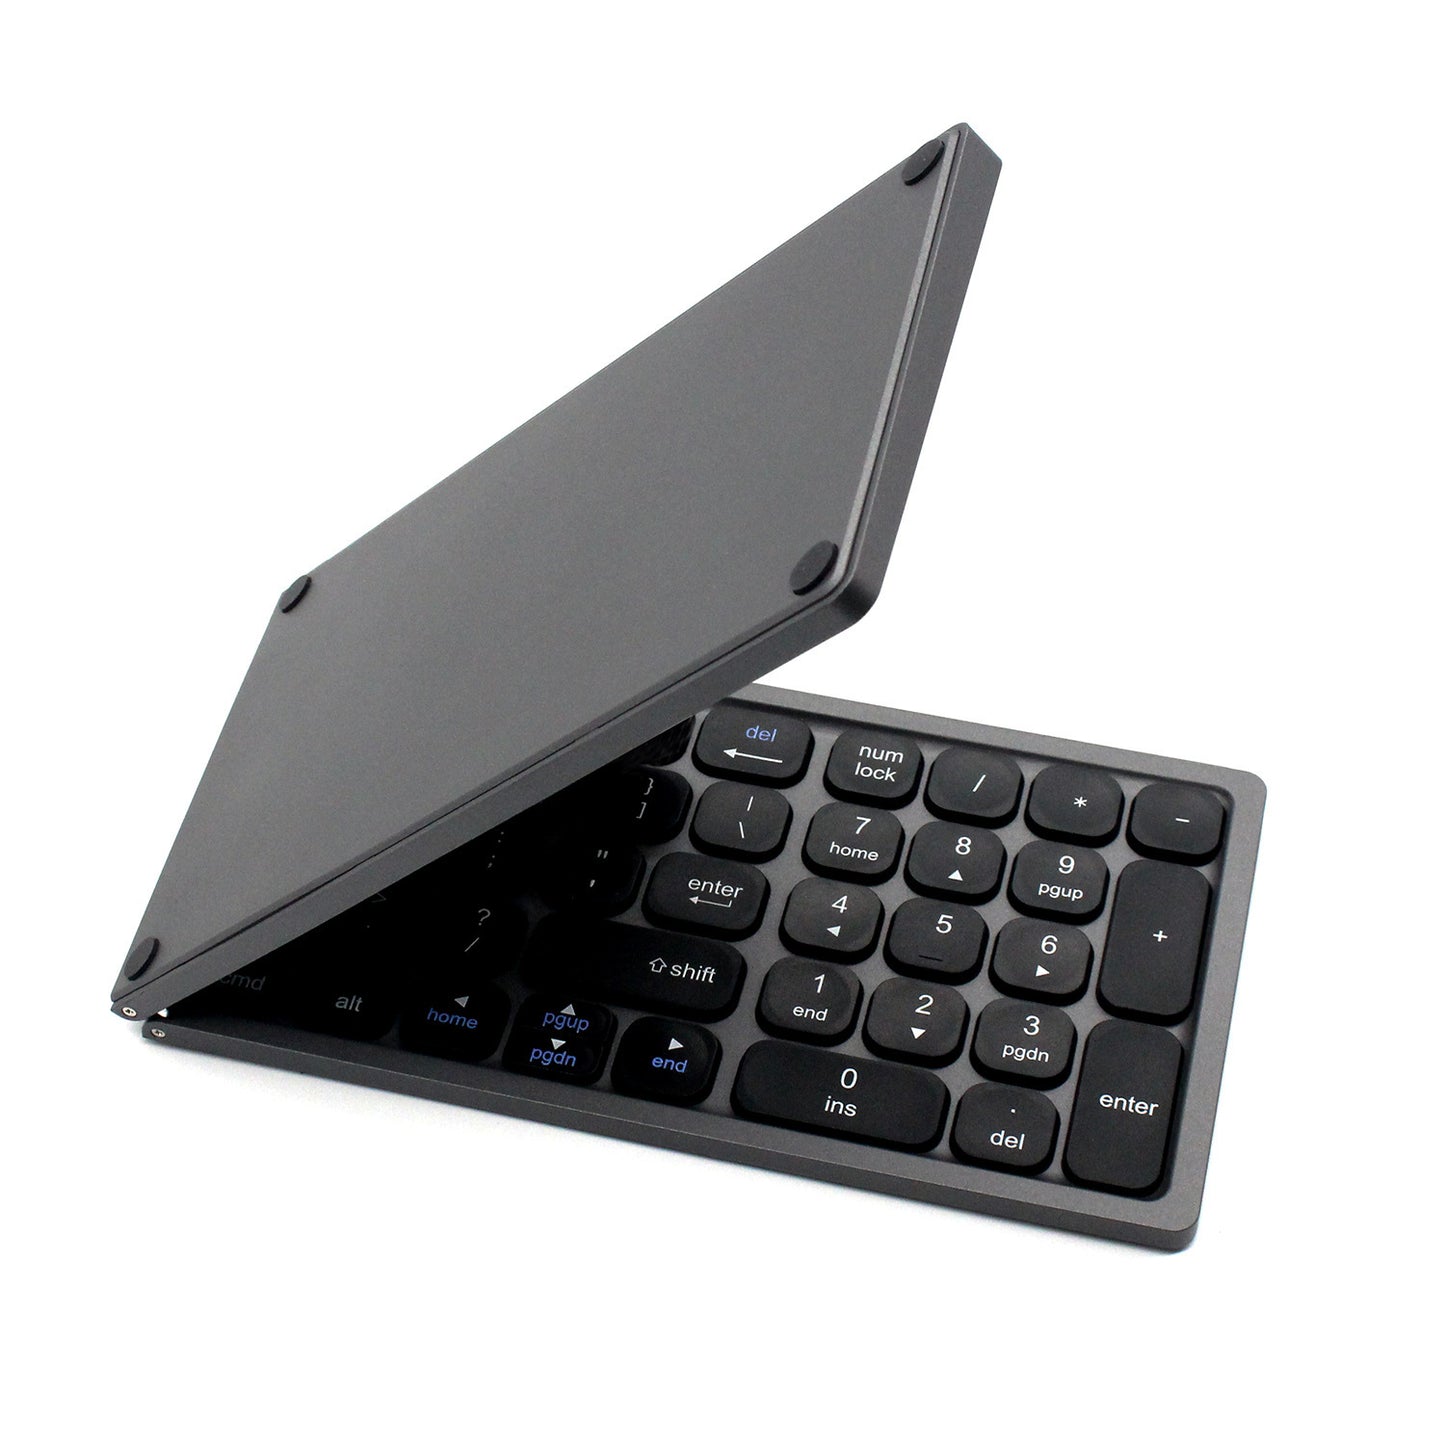 oldable Bluetooth Keyboard with Numeric Keypad - Full Size Portable Wireless Keyboard with Holder, Rechargeable Pocket Folding Keyboard for IOS Windows Android Phone Tablet Laptop